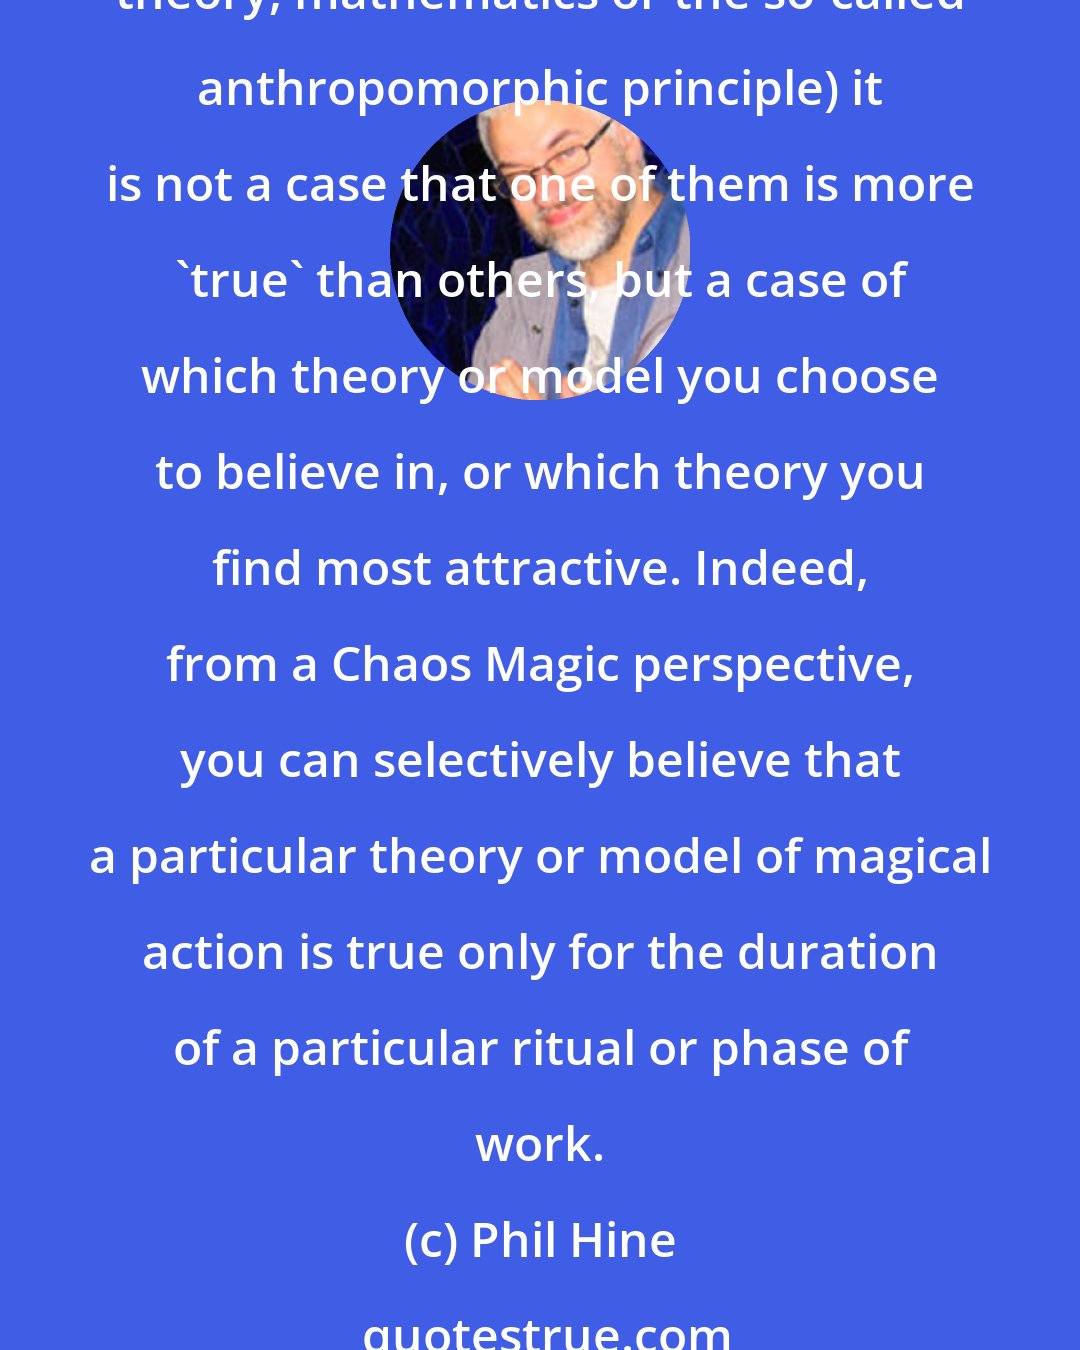 Phil Hine: Henceforth, whilst there are a great many theories and models proposed as to how, or why, magic works (based on subtle energies, animal magnetism, psychological concepts, quantum theory, mathematics or the so-called anthropomorphic principle) it is not a case that one of them is more 'true' than others, but a case of which theory or model you choose to believe in, or which theory you find most attractive. Indeed, from a Chaos Magic perspective, you can selectively believe that a particular theory or model of magical action is true only for the duration of a particular ritual or phase of work.